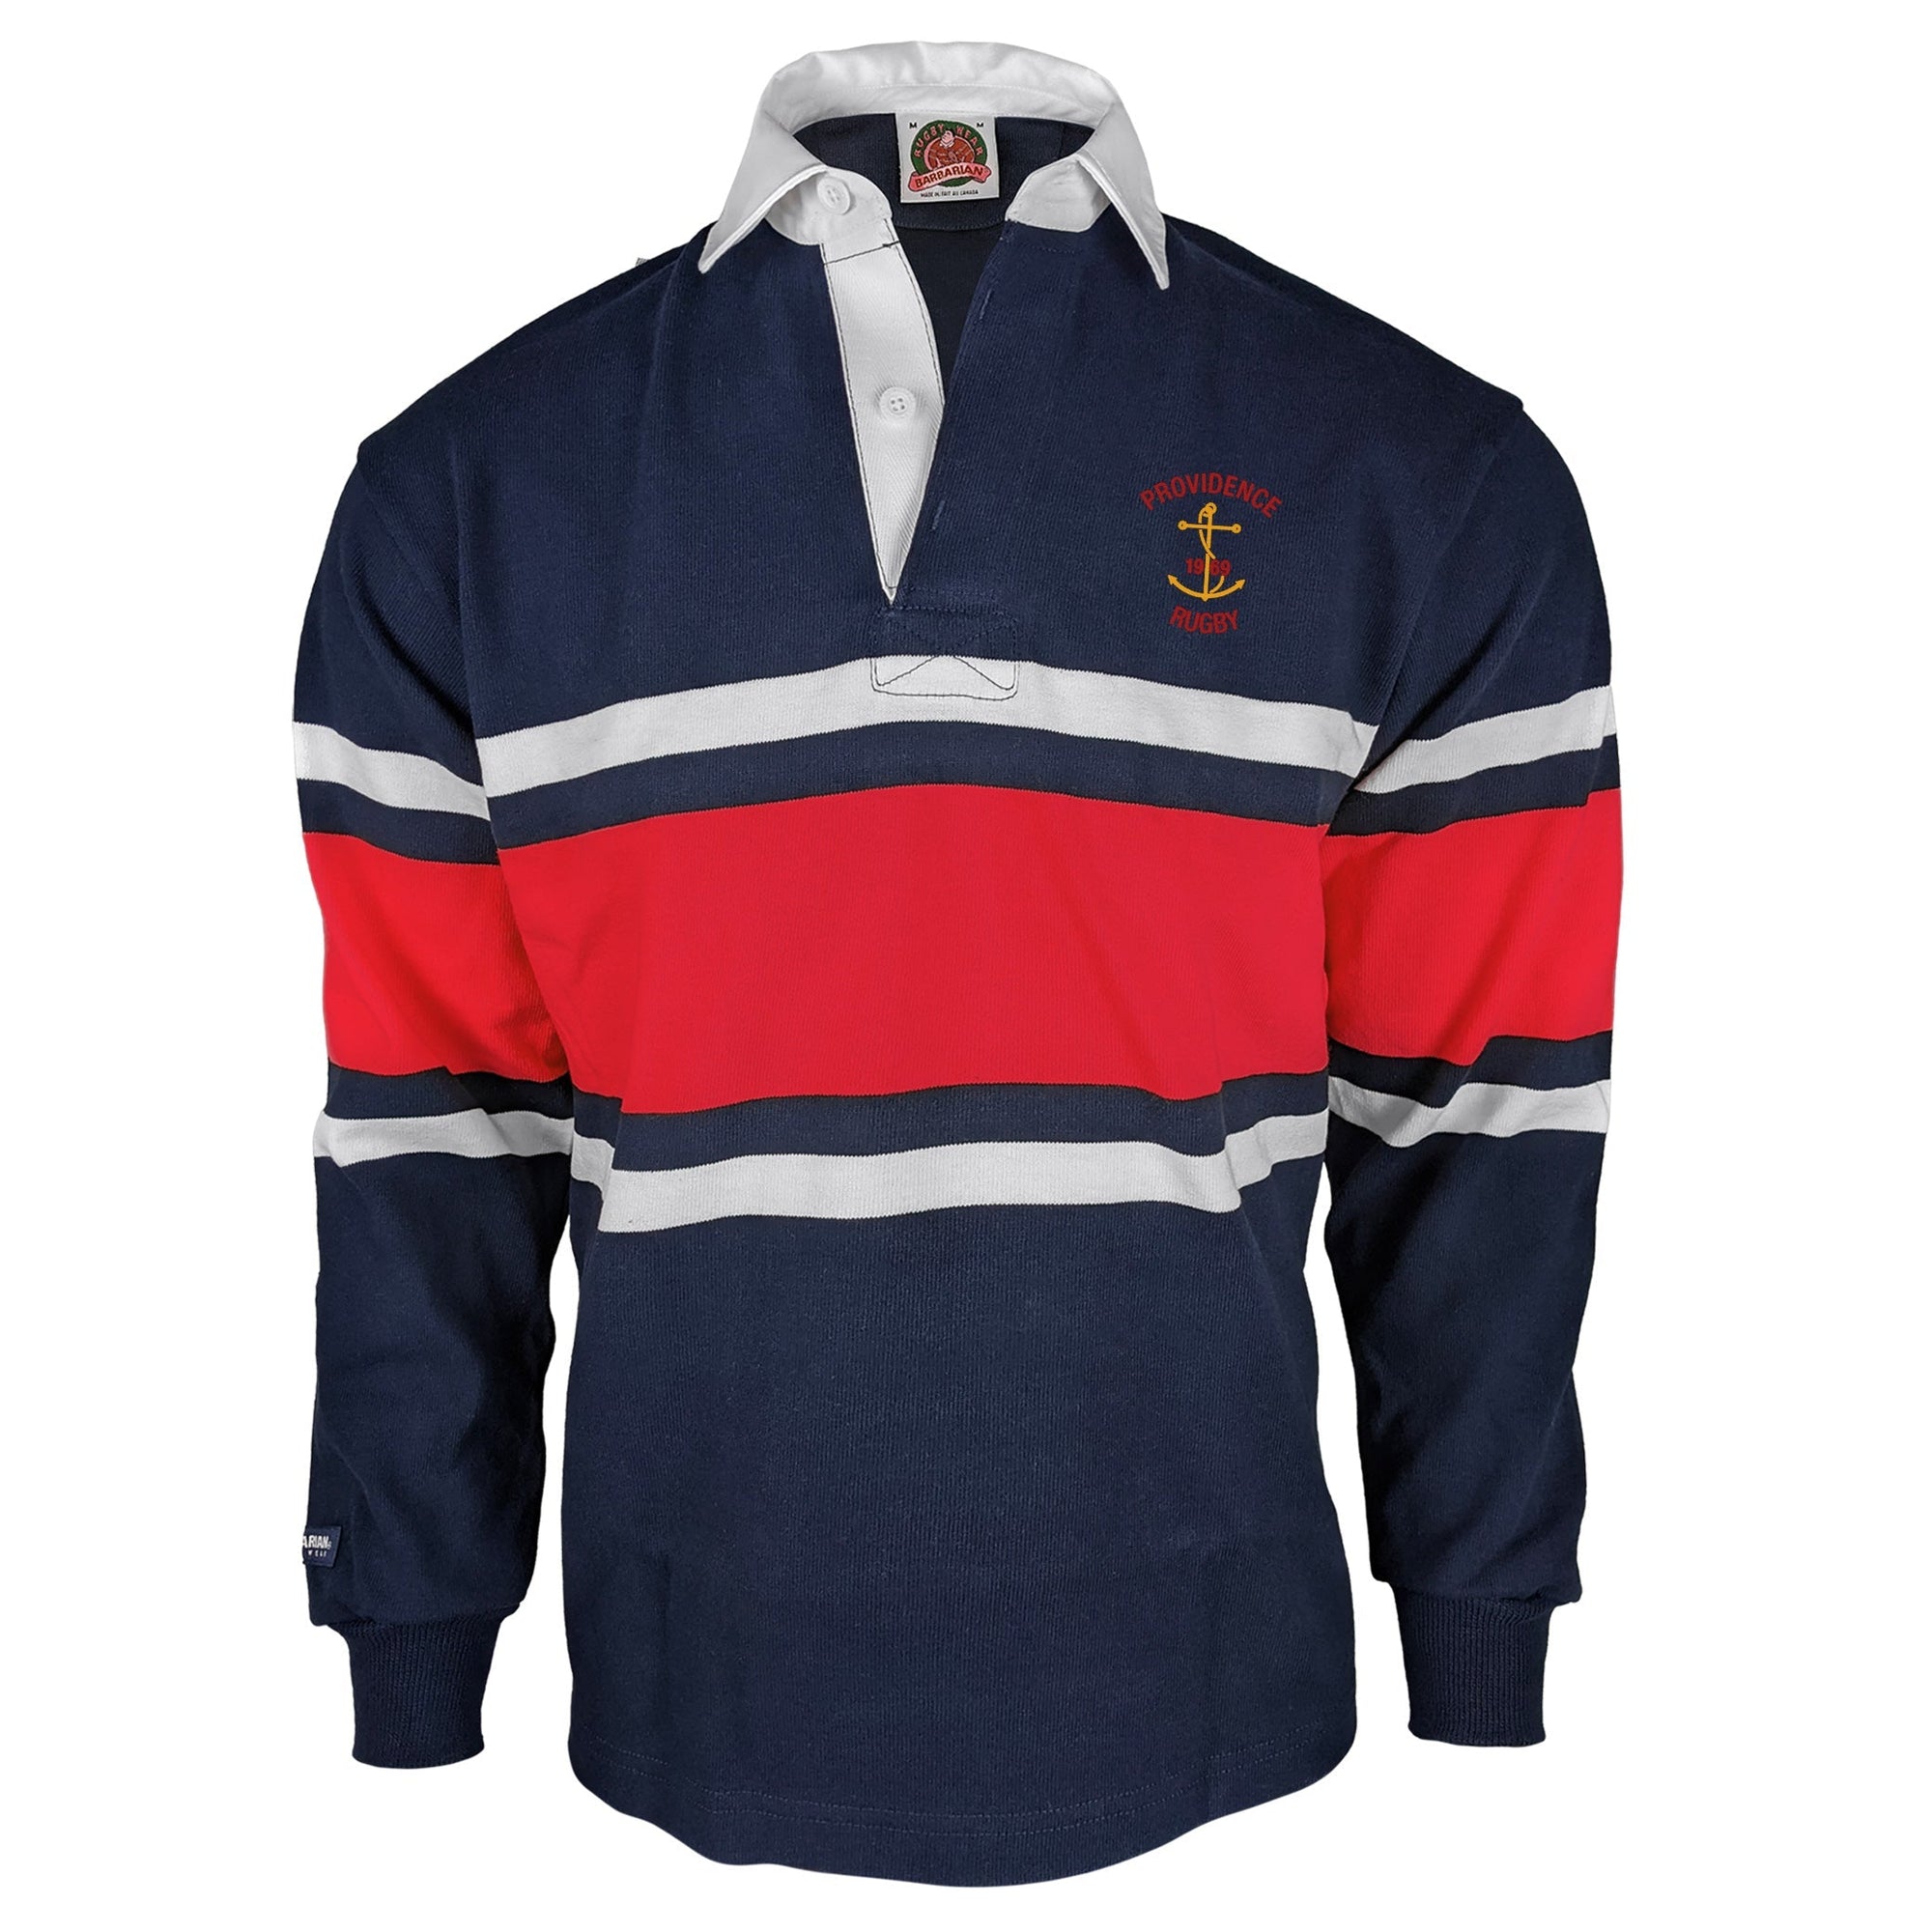 Rugby Imports Providence RFC Collegiate Stripe Rugby Jersey